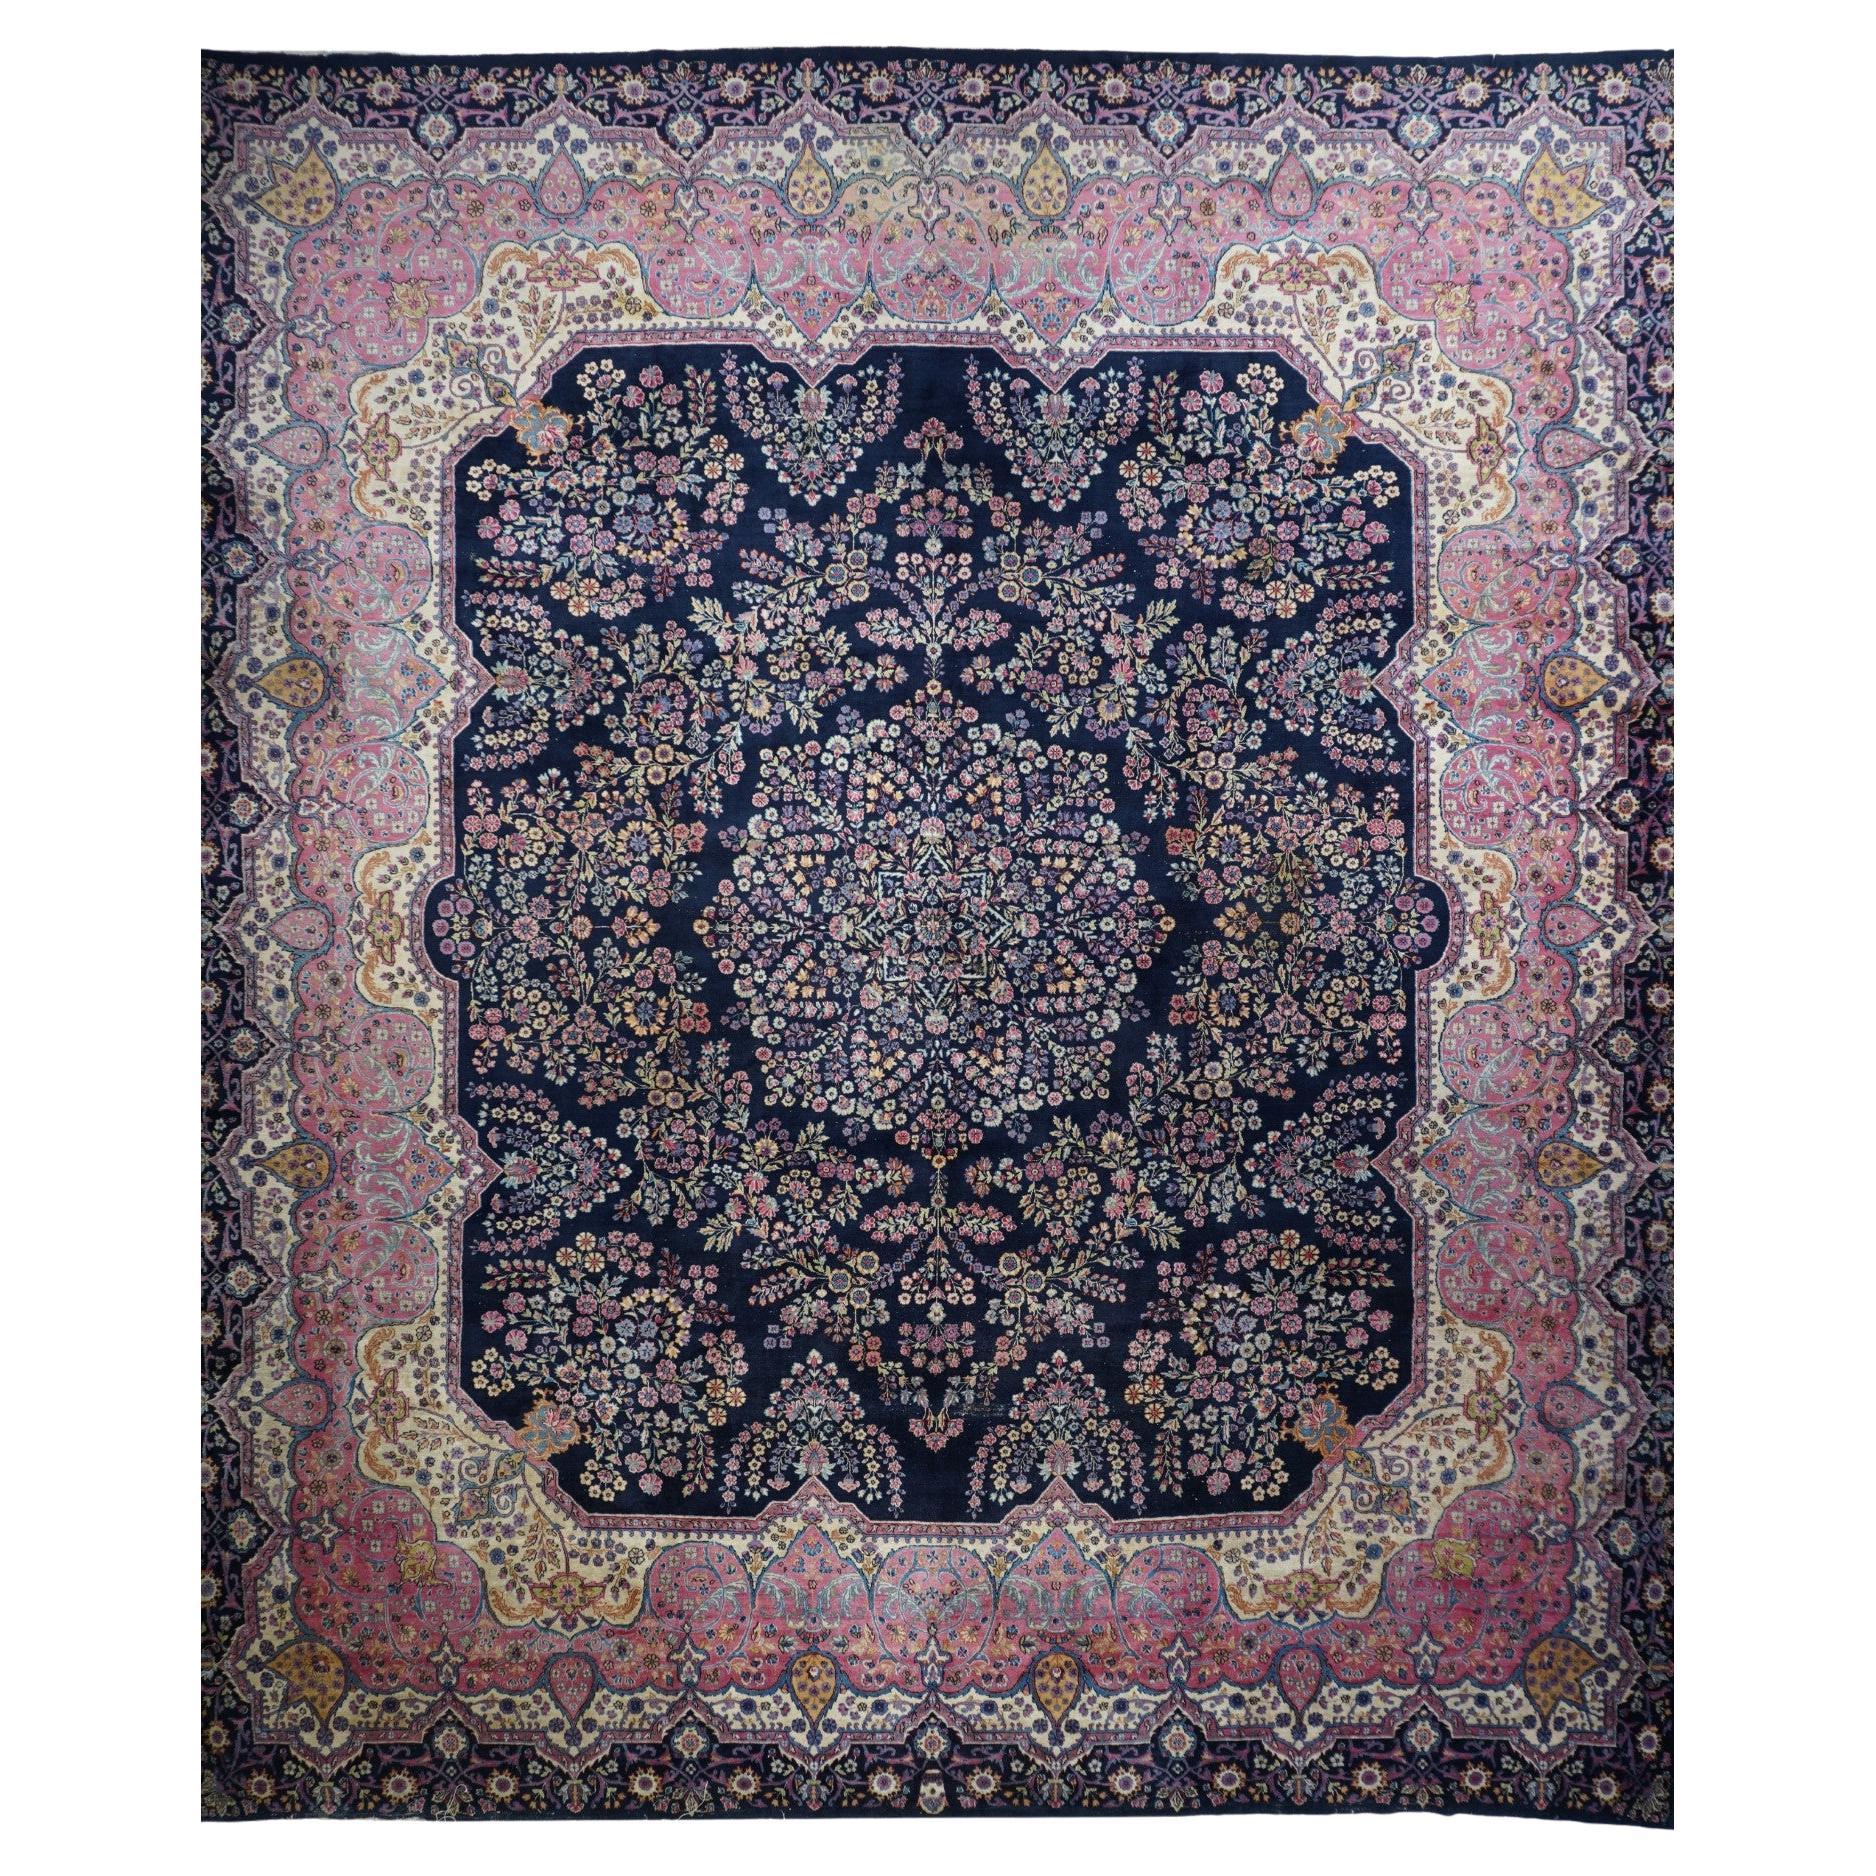 Persia Wool on Cotton Rug